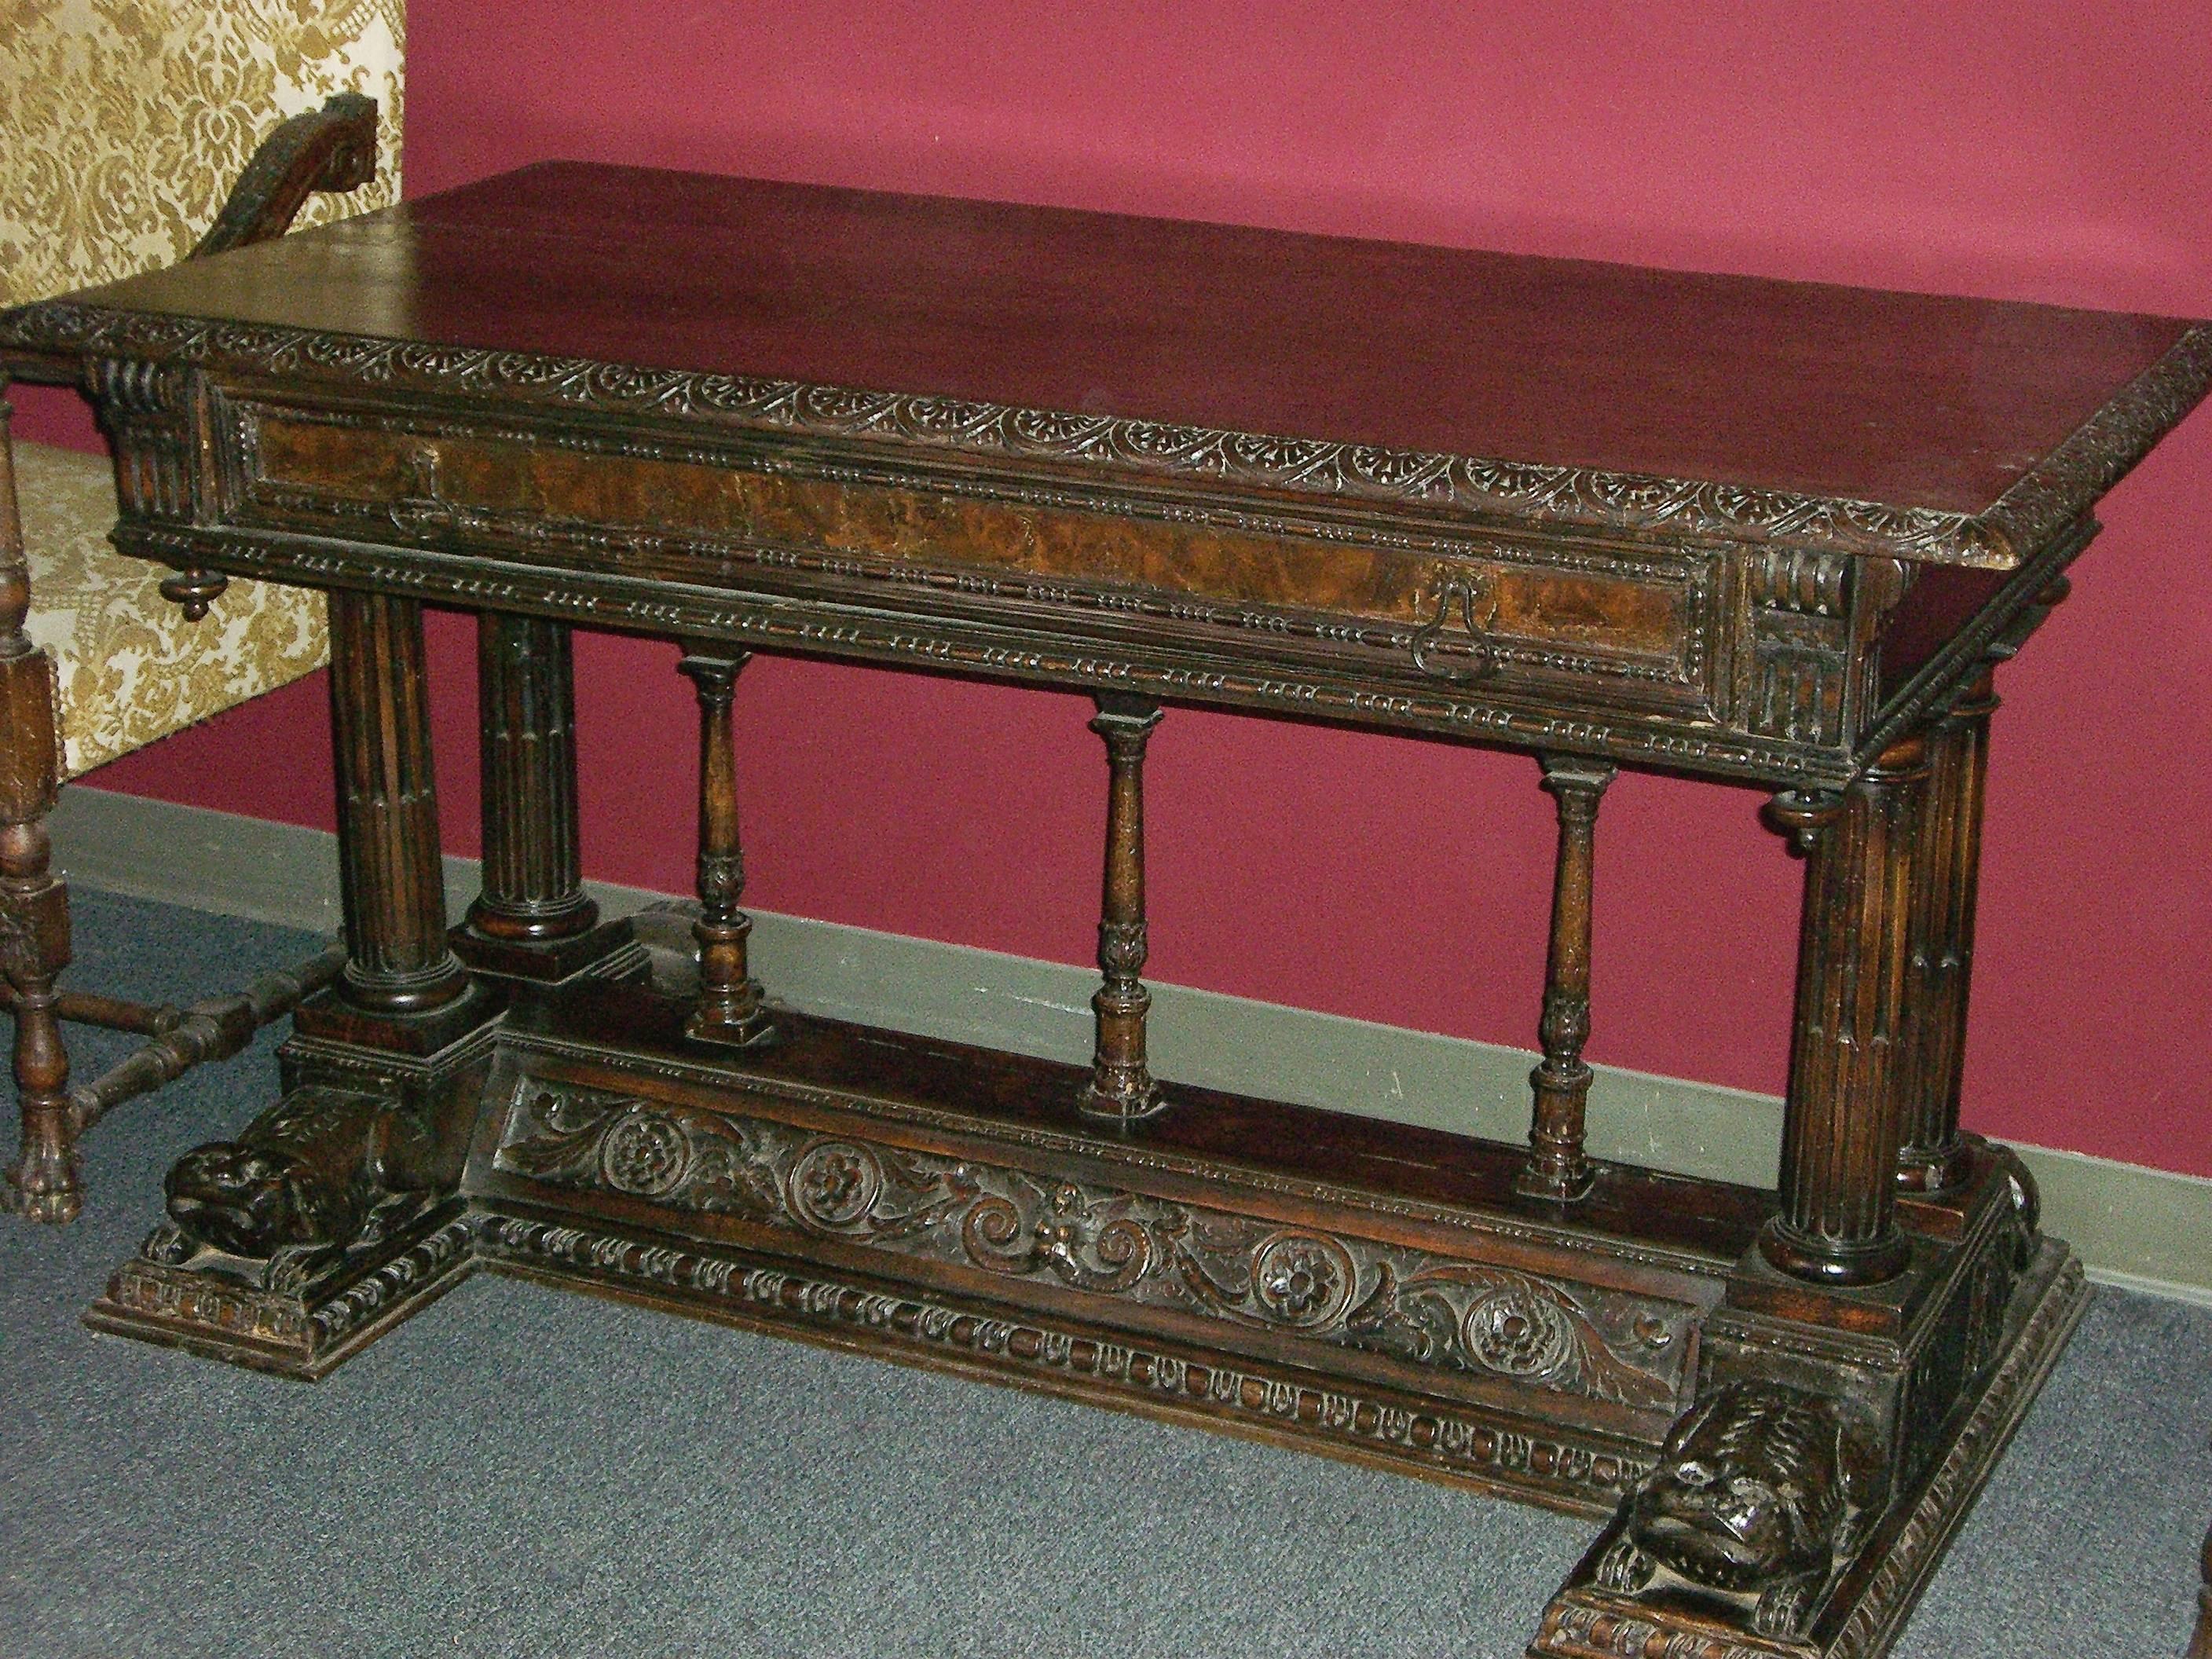 Spanish Renaissance hand-carved walnut table, 16th century and later. The solid walnut top with carved trimmed edges over a frieze containing one large drawer with two bronze handles resting on four fluted columns and three small center supports,